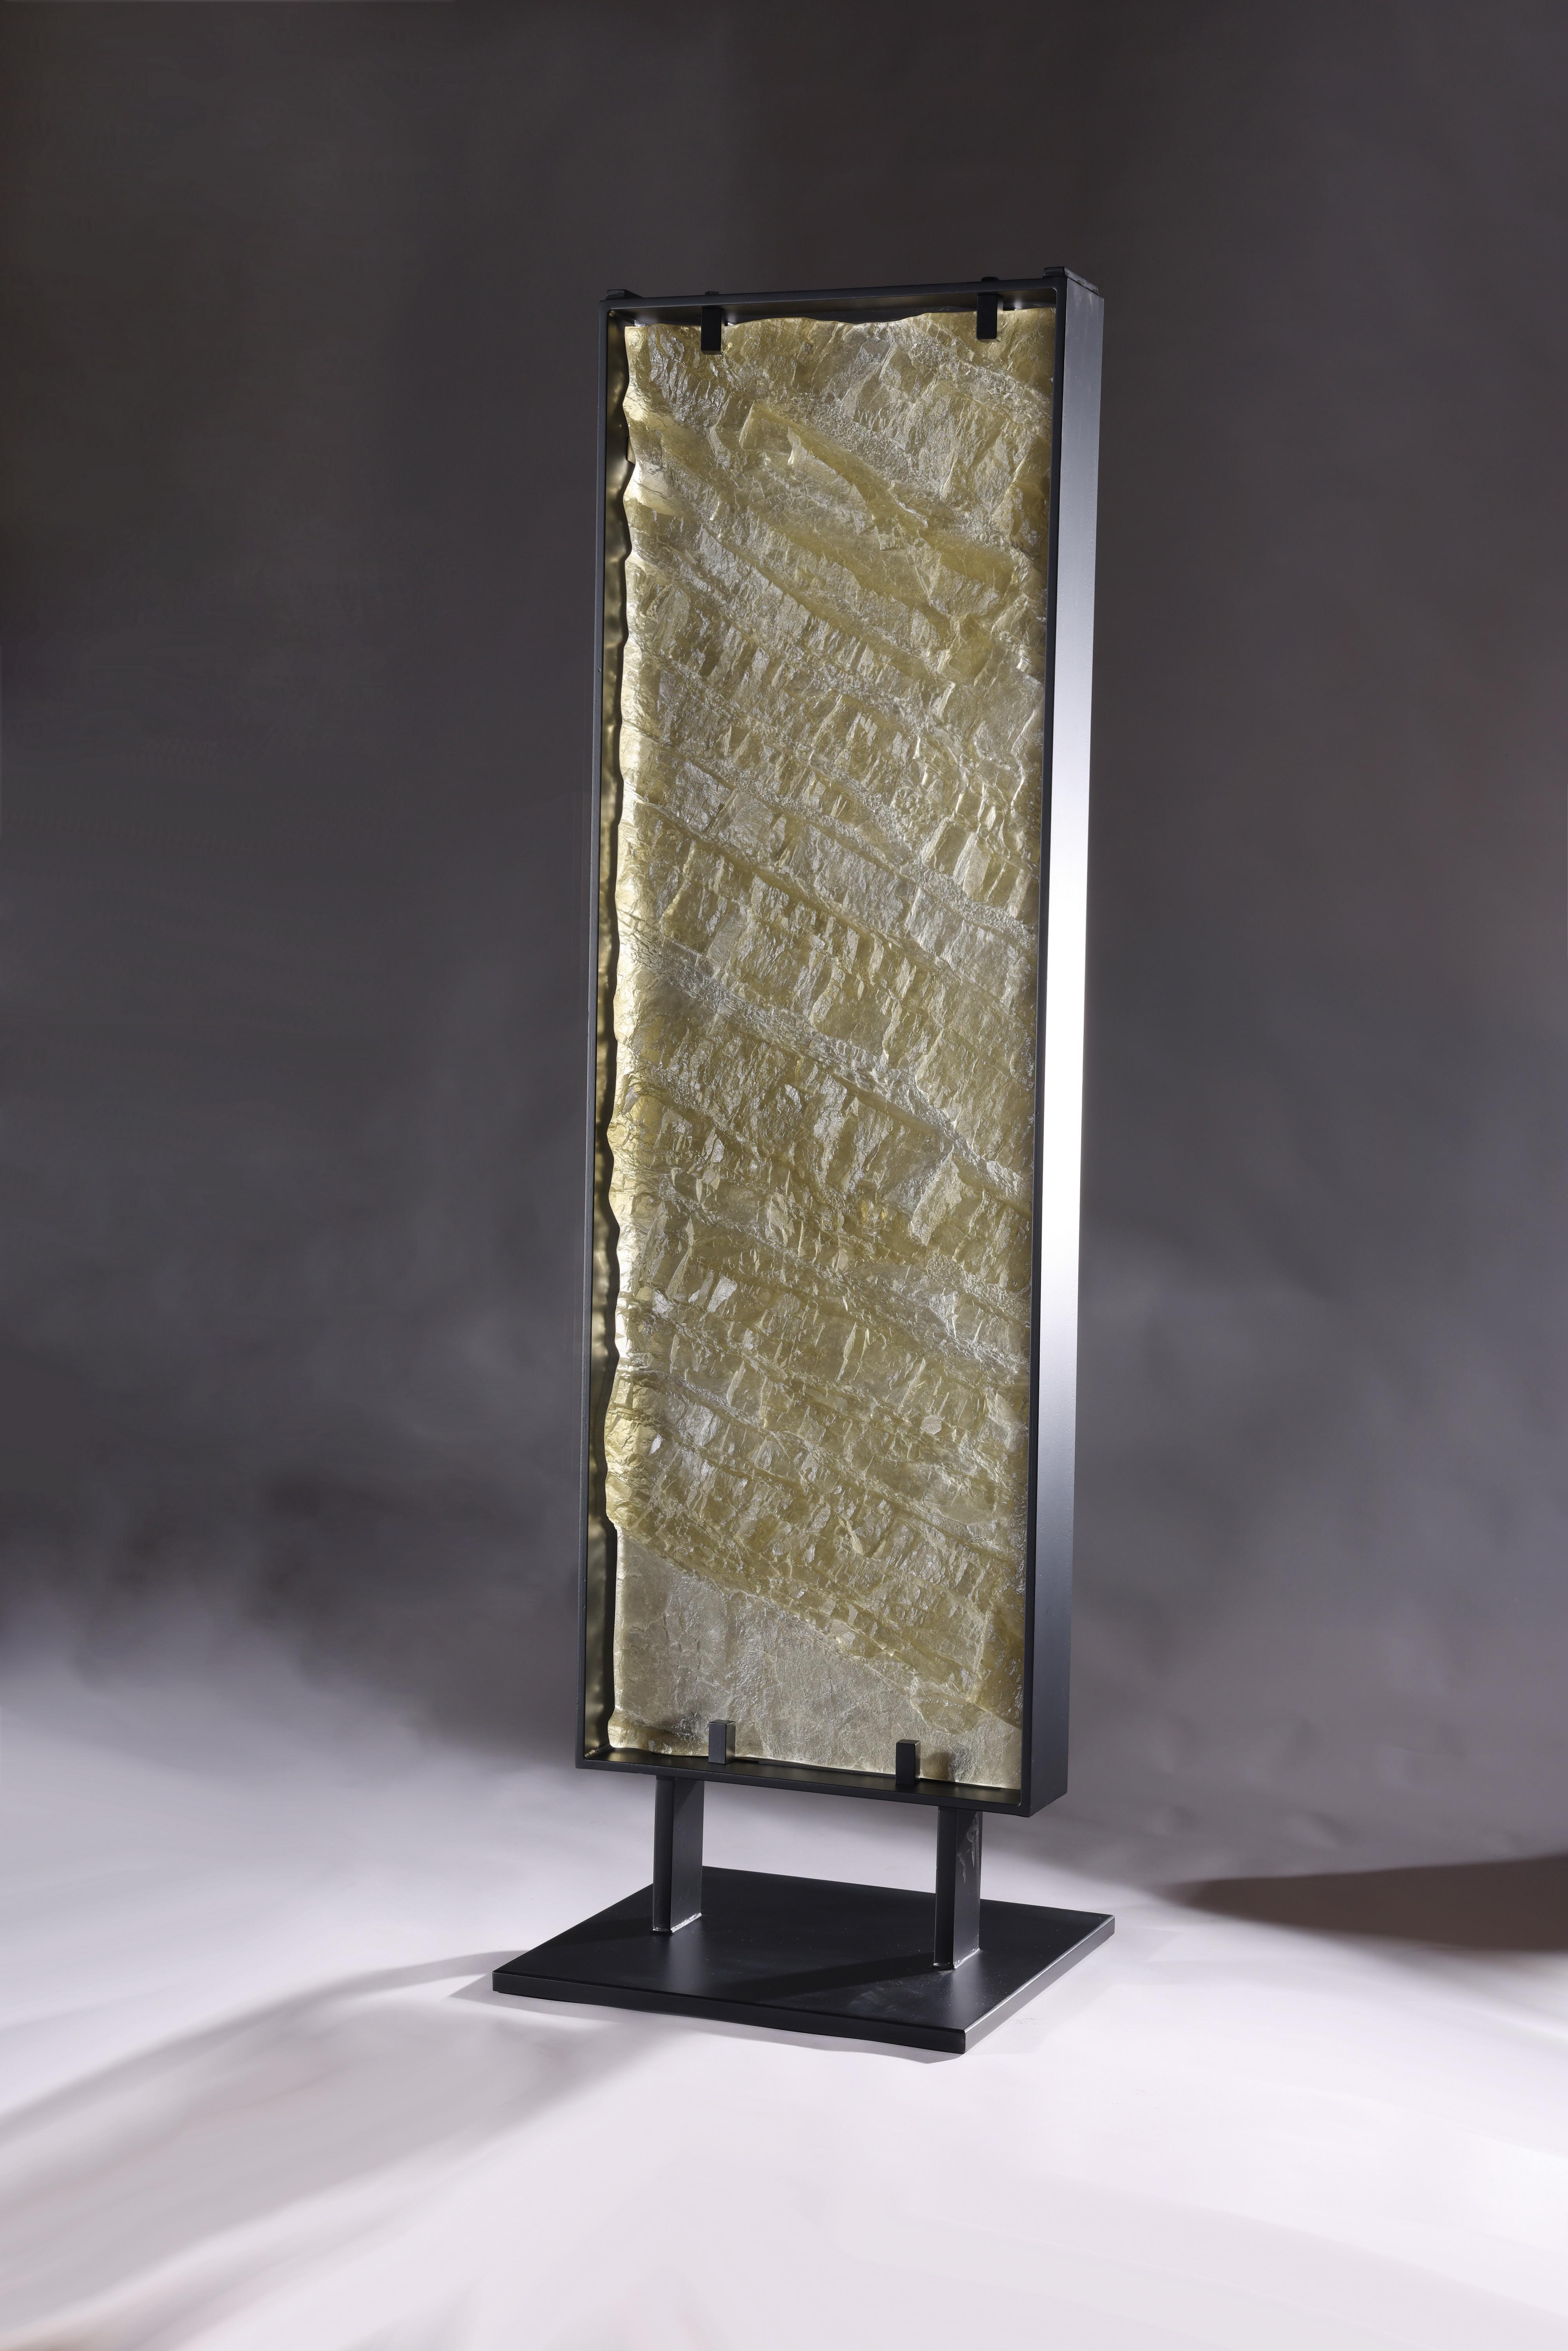 Please allow a three month turnaround time for piece to be made.

The Geologic Screens Series
The Geologic Screens are studies from the Colorado Cascade Mural. David pieced together bits of the original rock and ice castings to try various